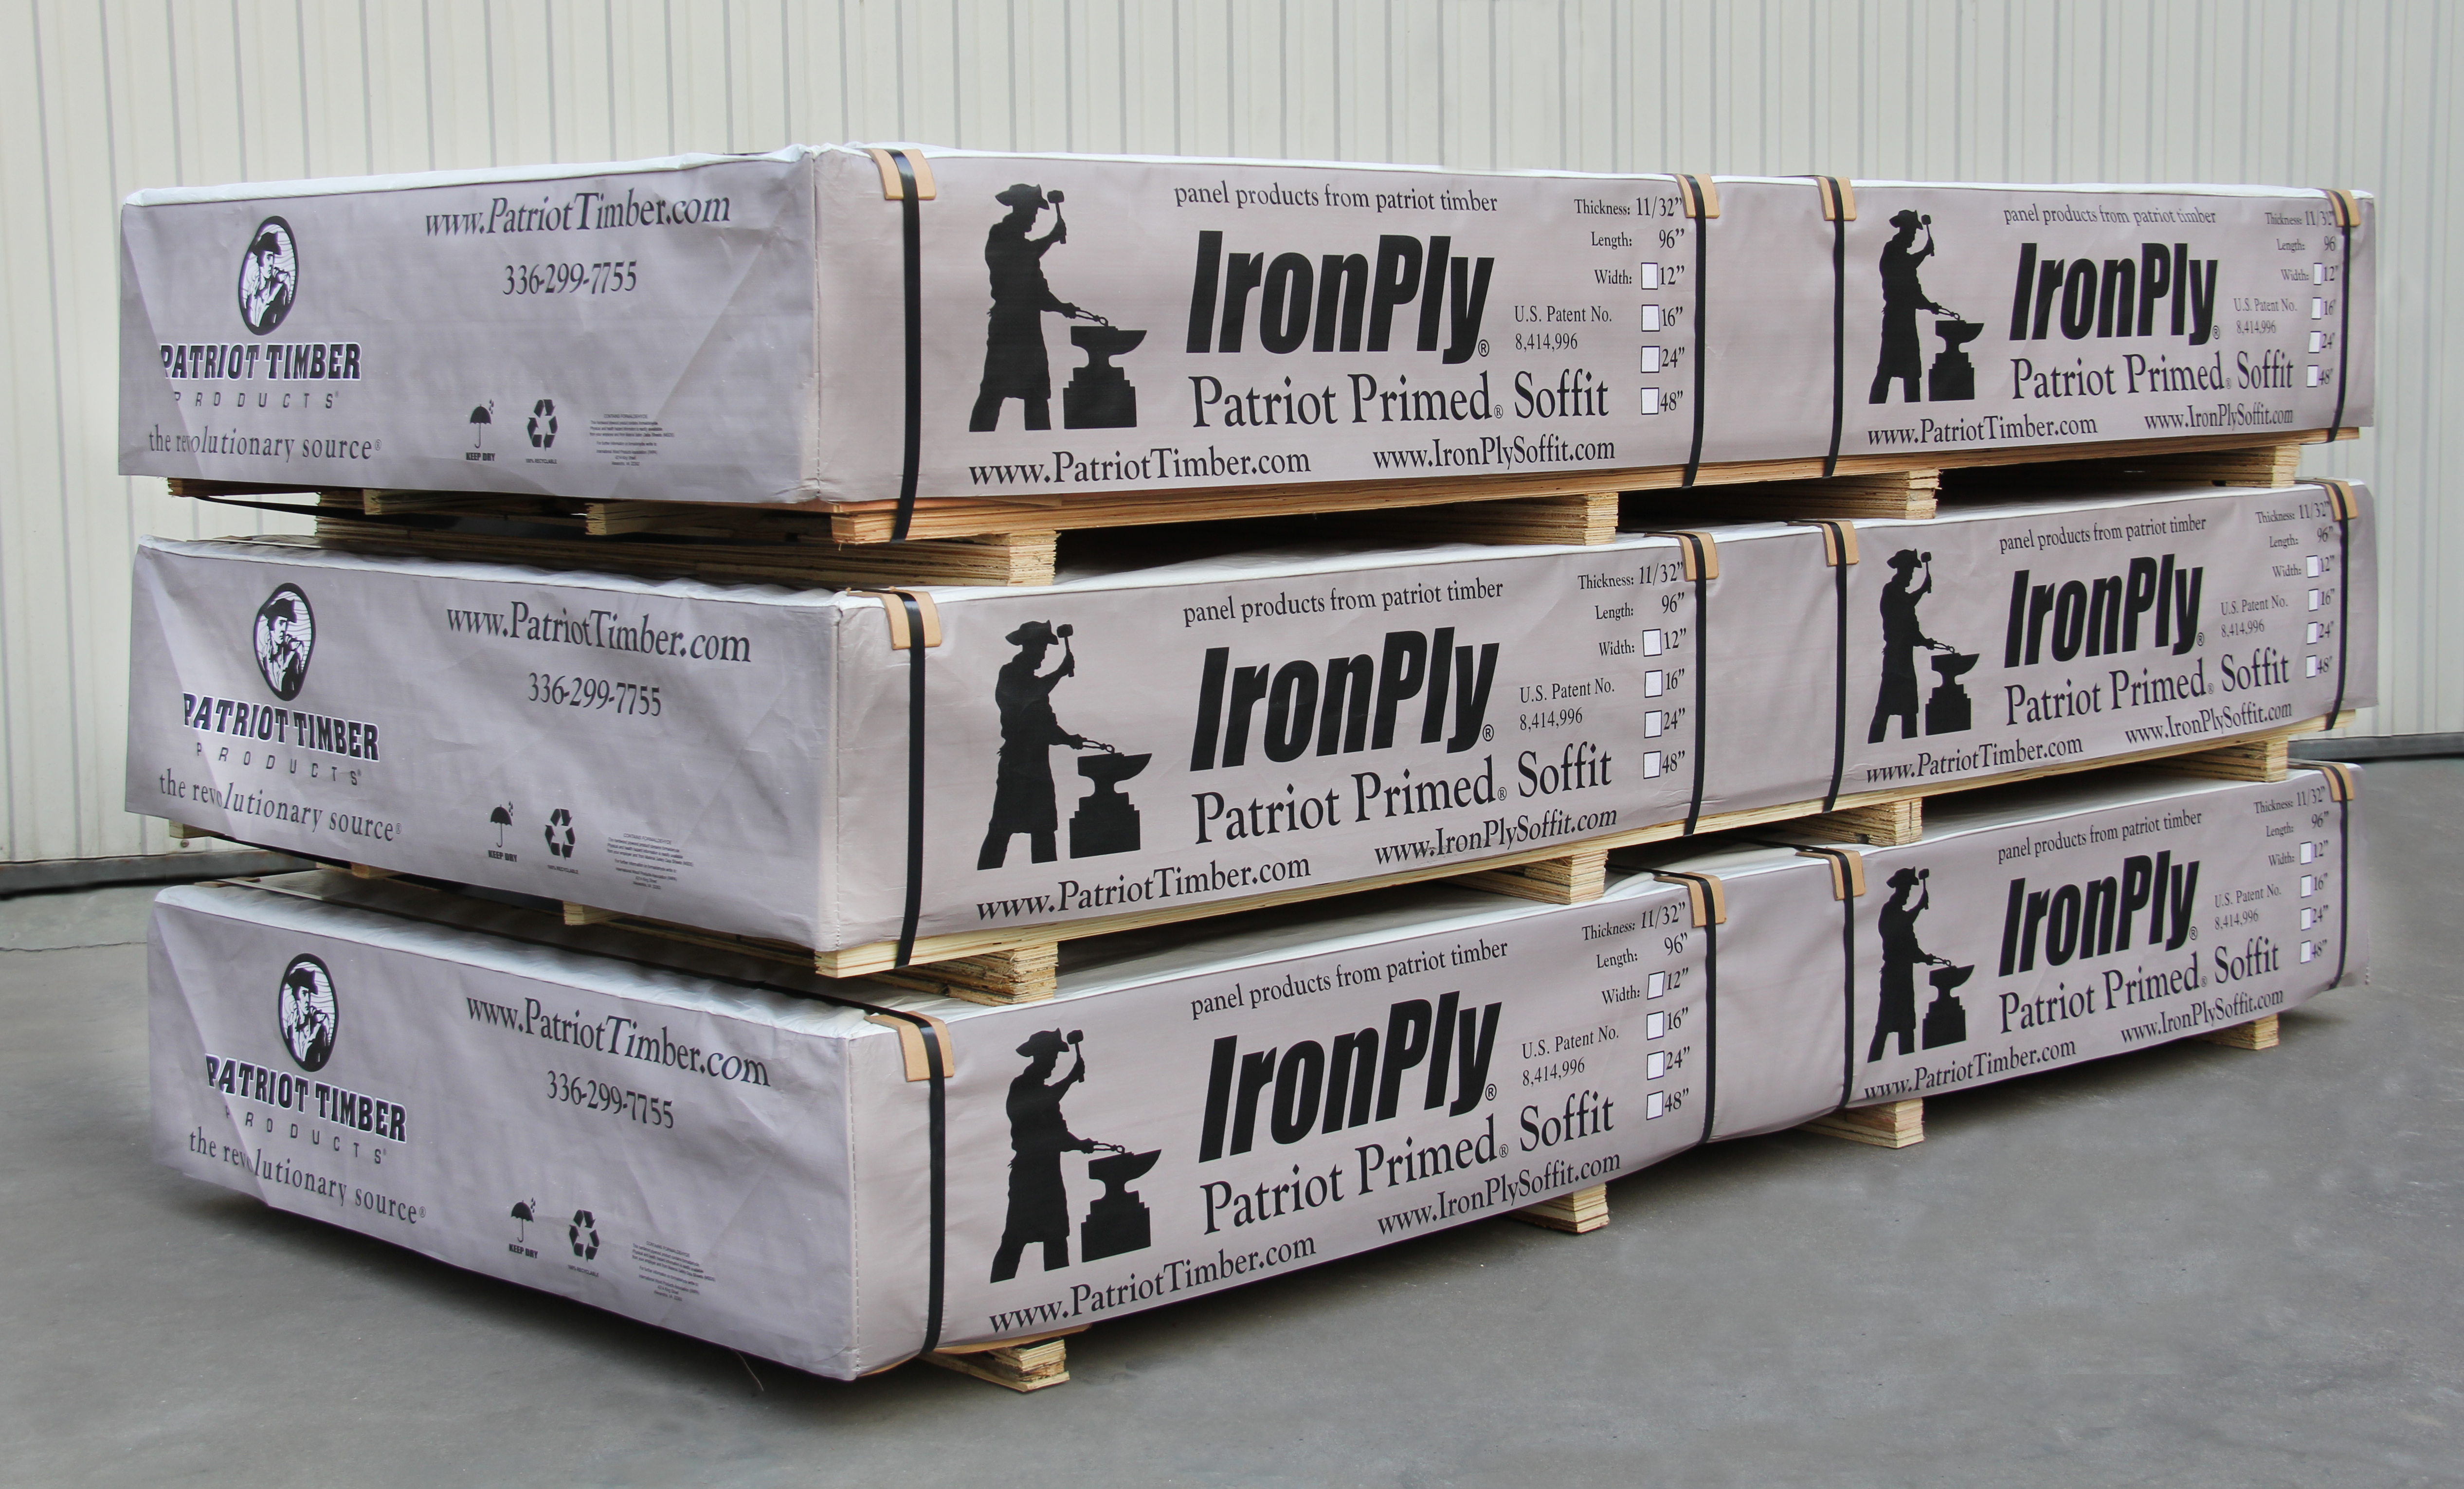 IronPly ® Patriot Primed® Soffit Crates